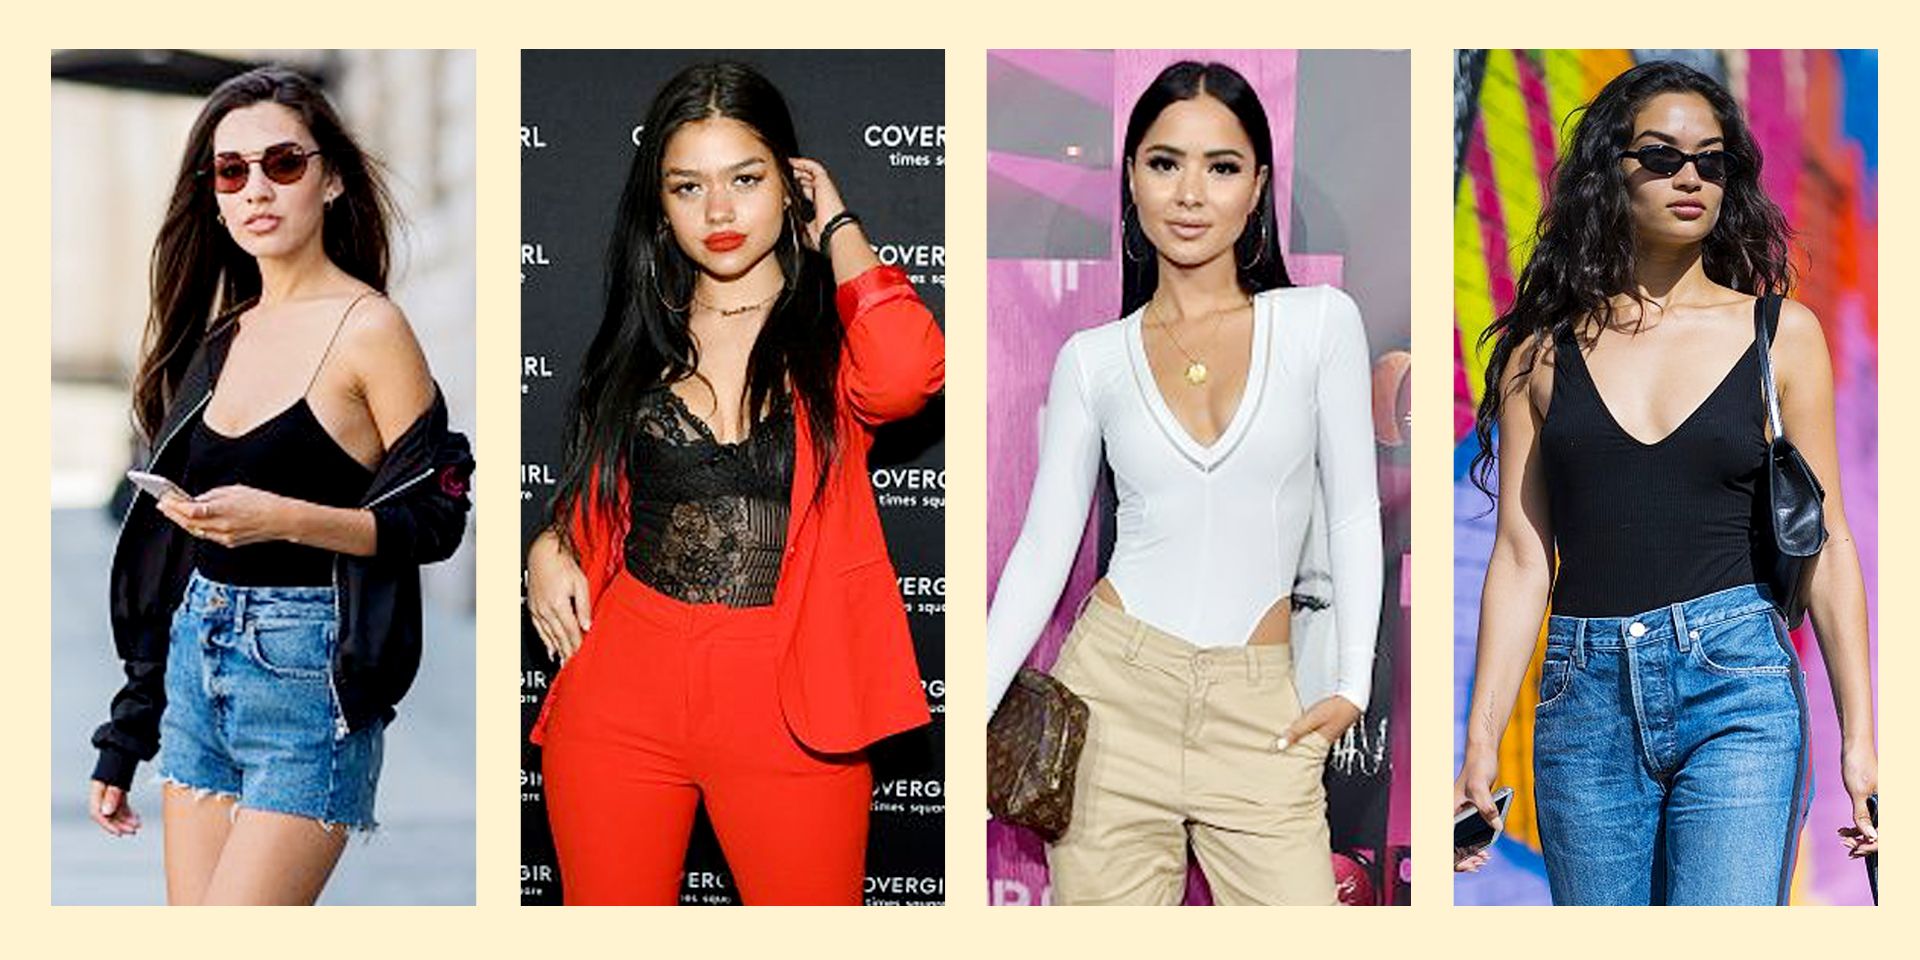 25 Outfits That'll Make You Want a Bodysuit ASAP